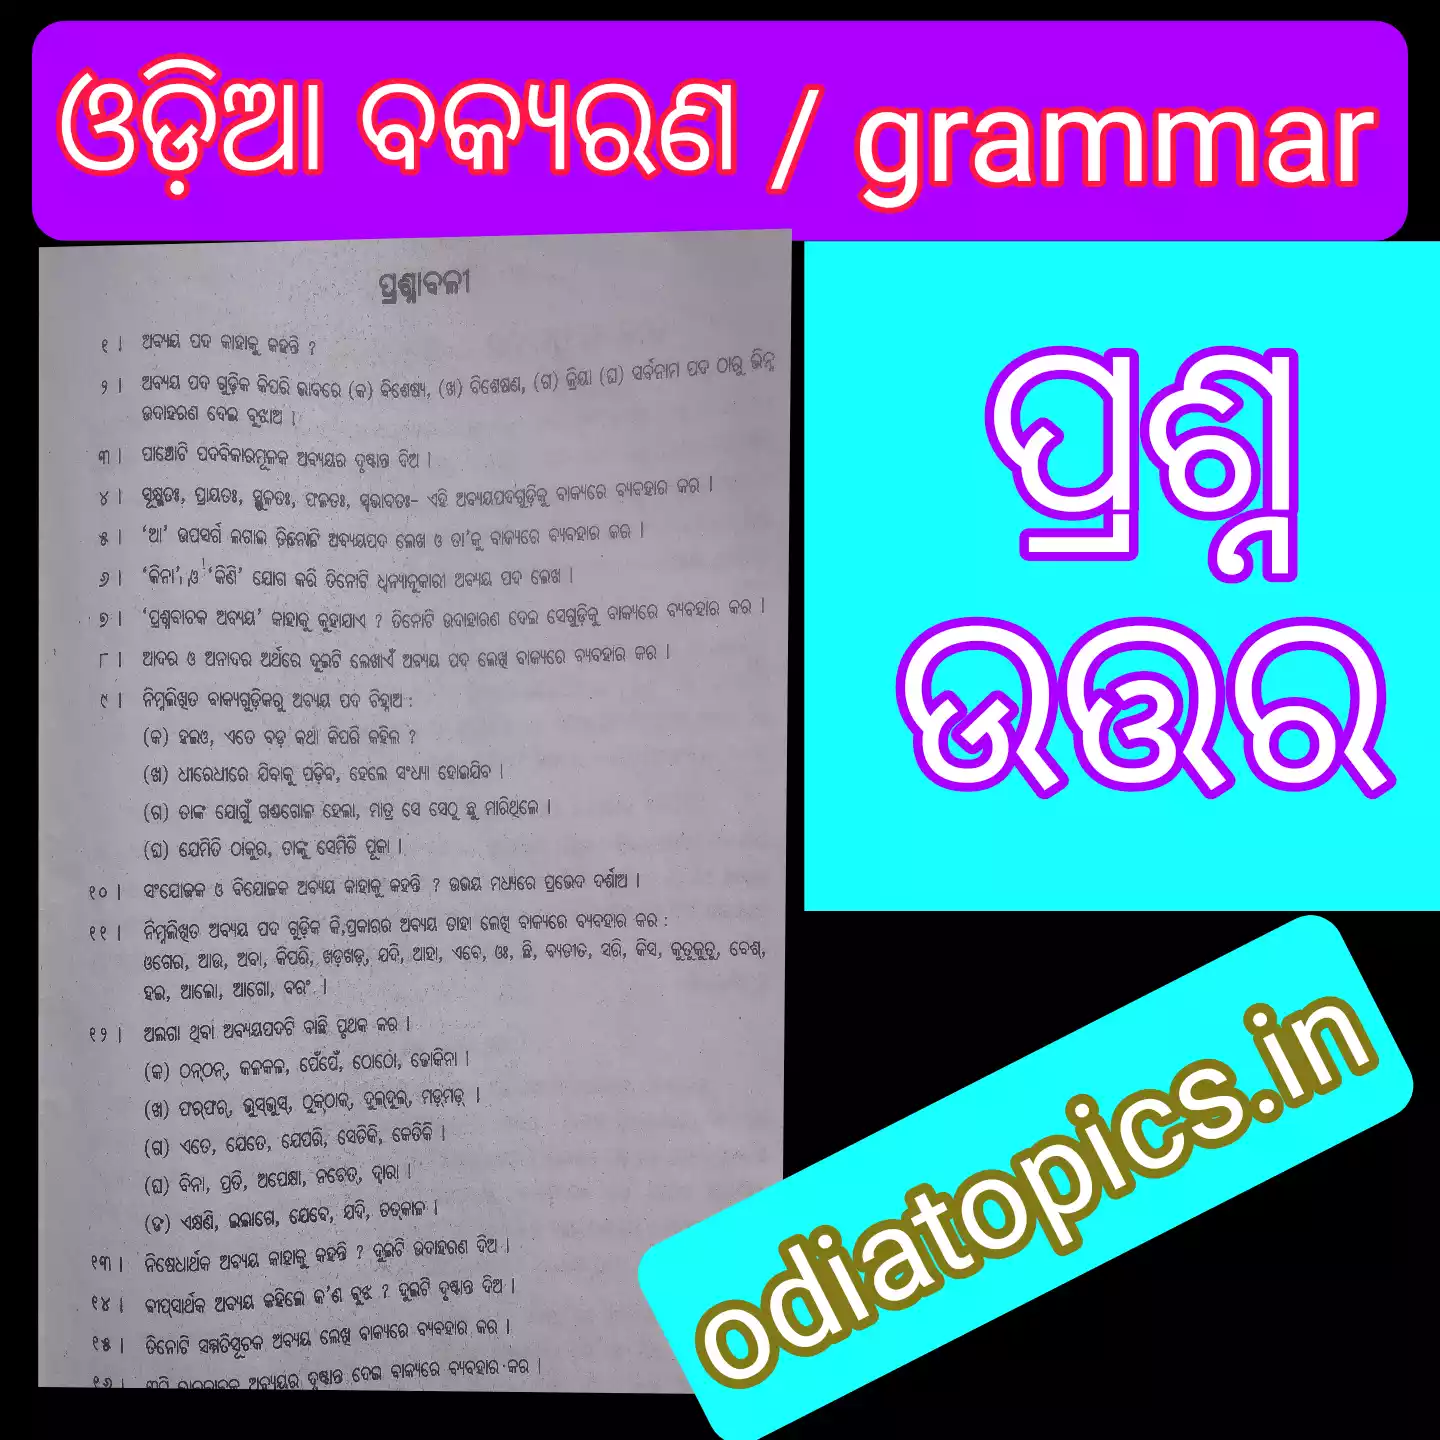 Odia Grammar questions and answers